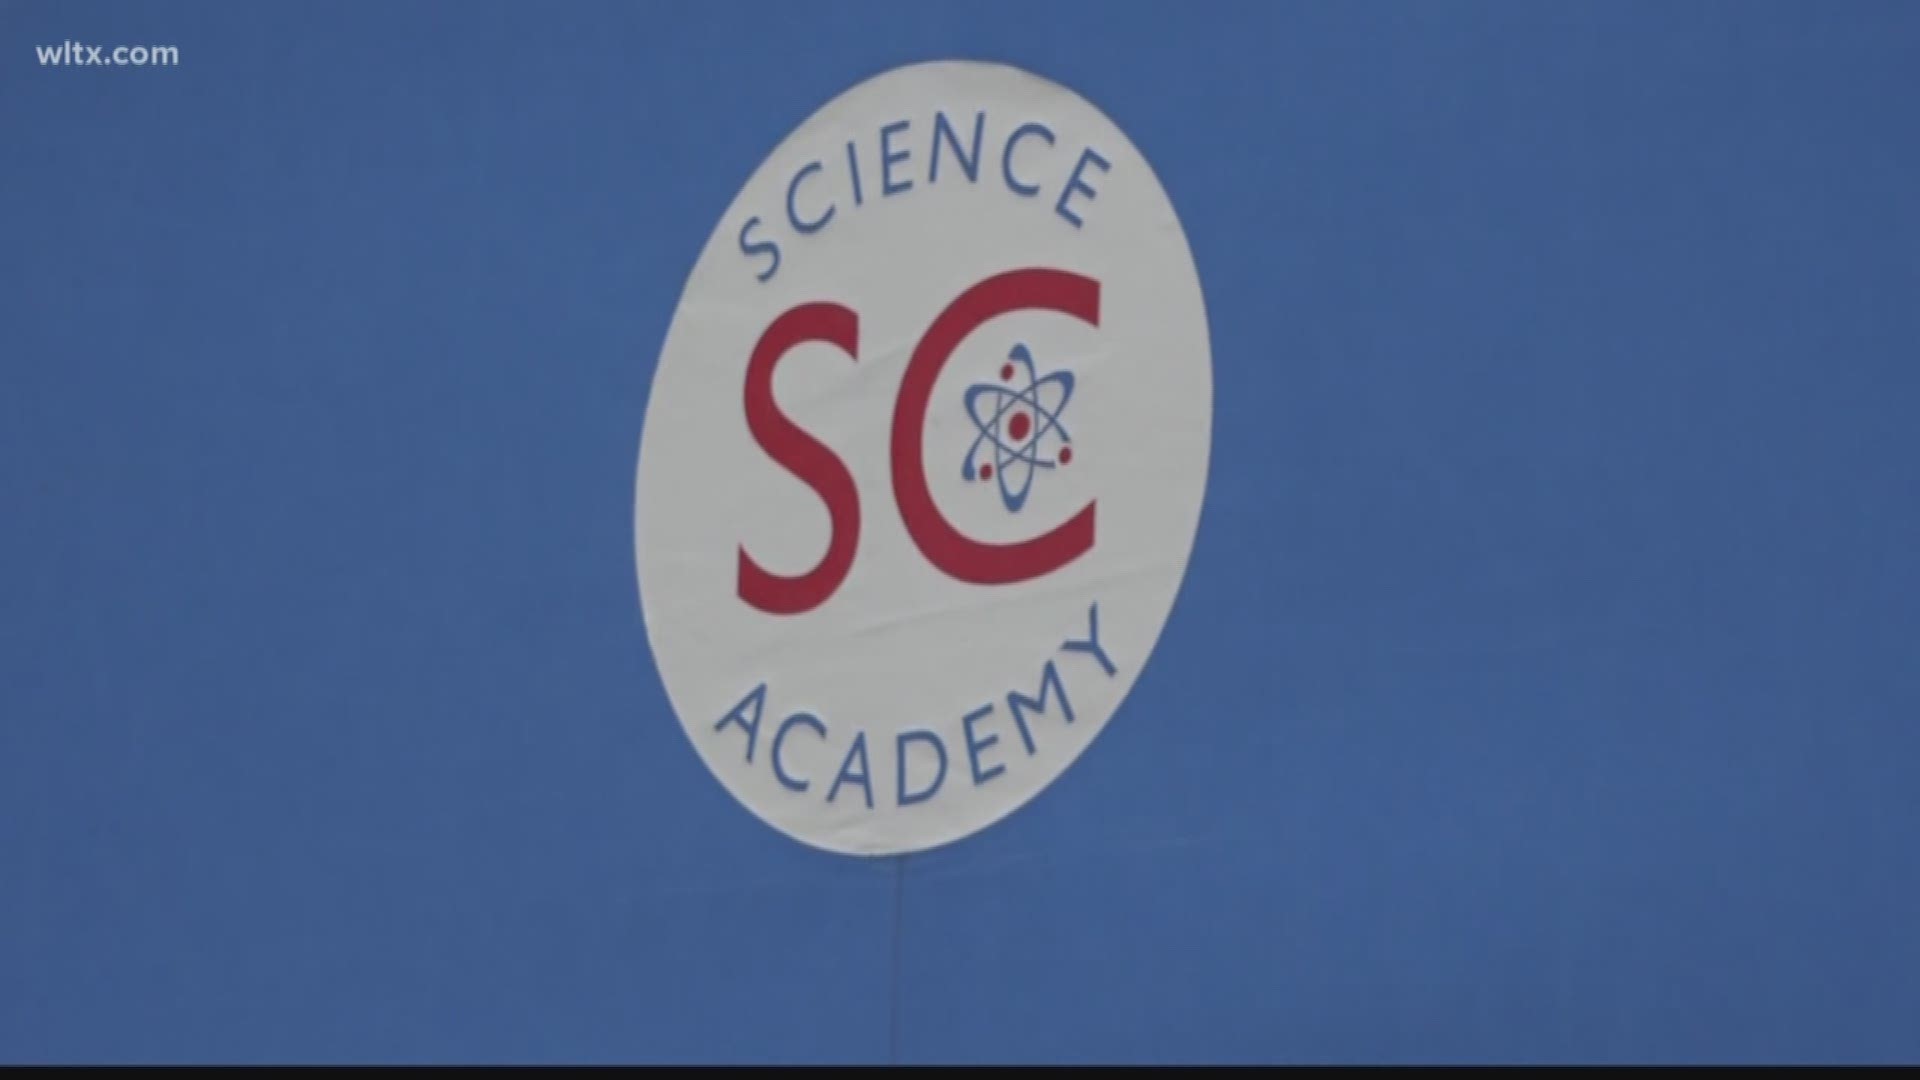 The South Carolina Science Academy in Columbia may be forced to close, their charter was revoked last month 